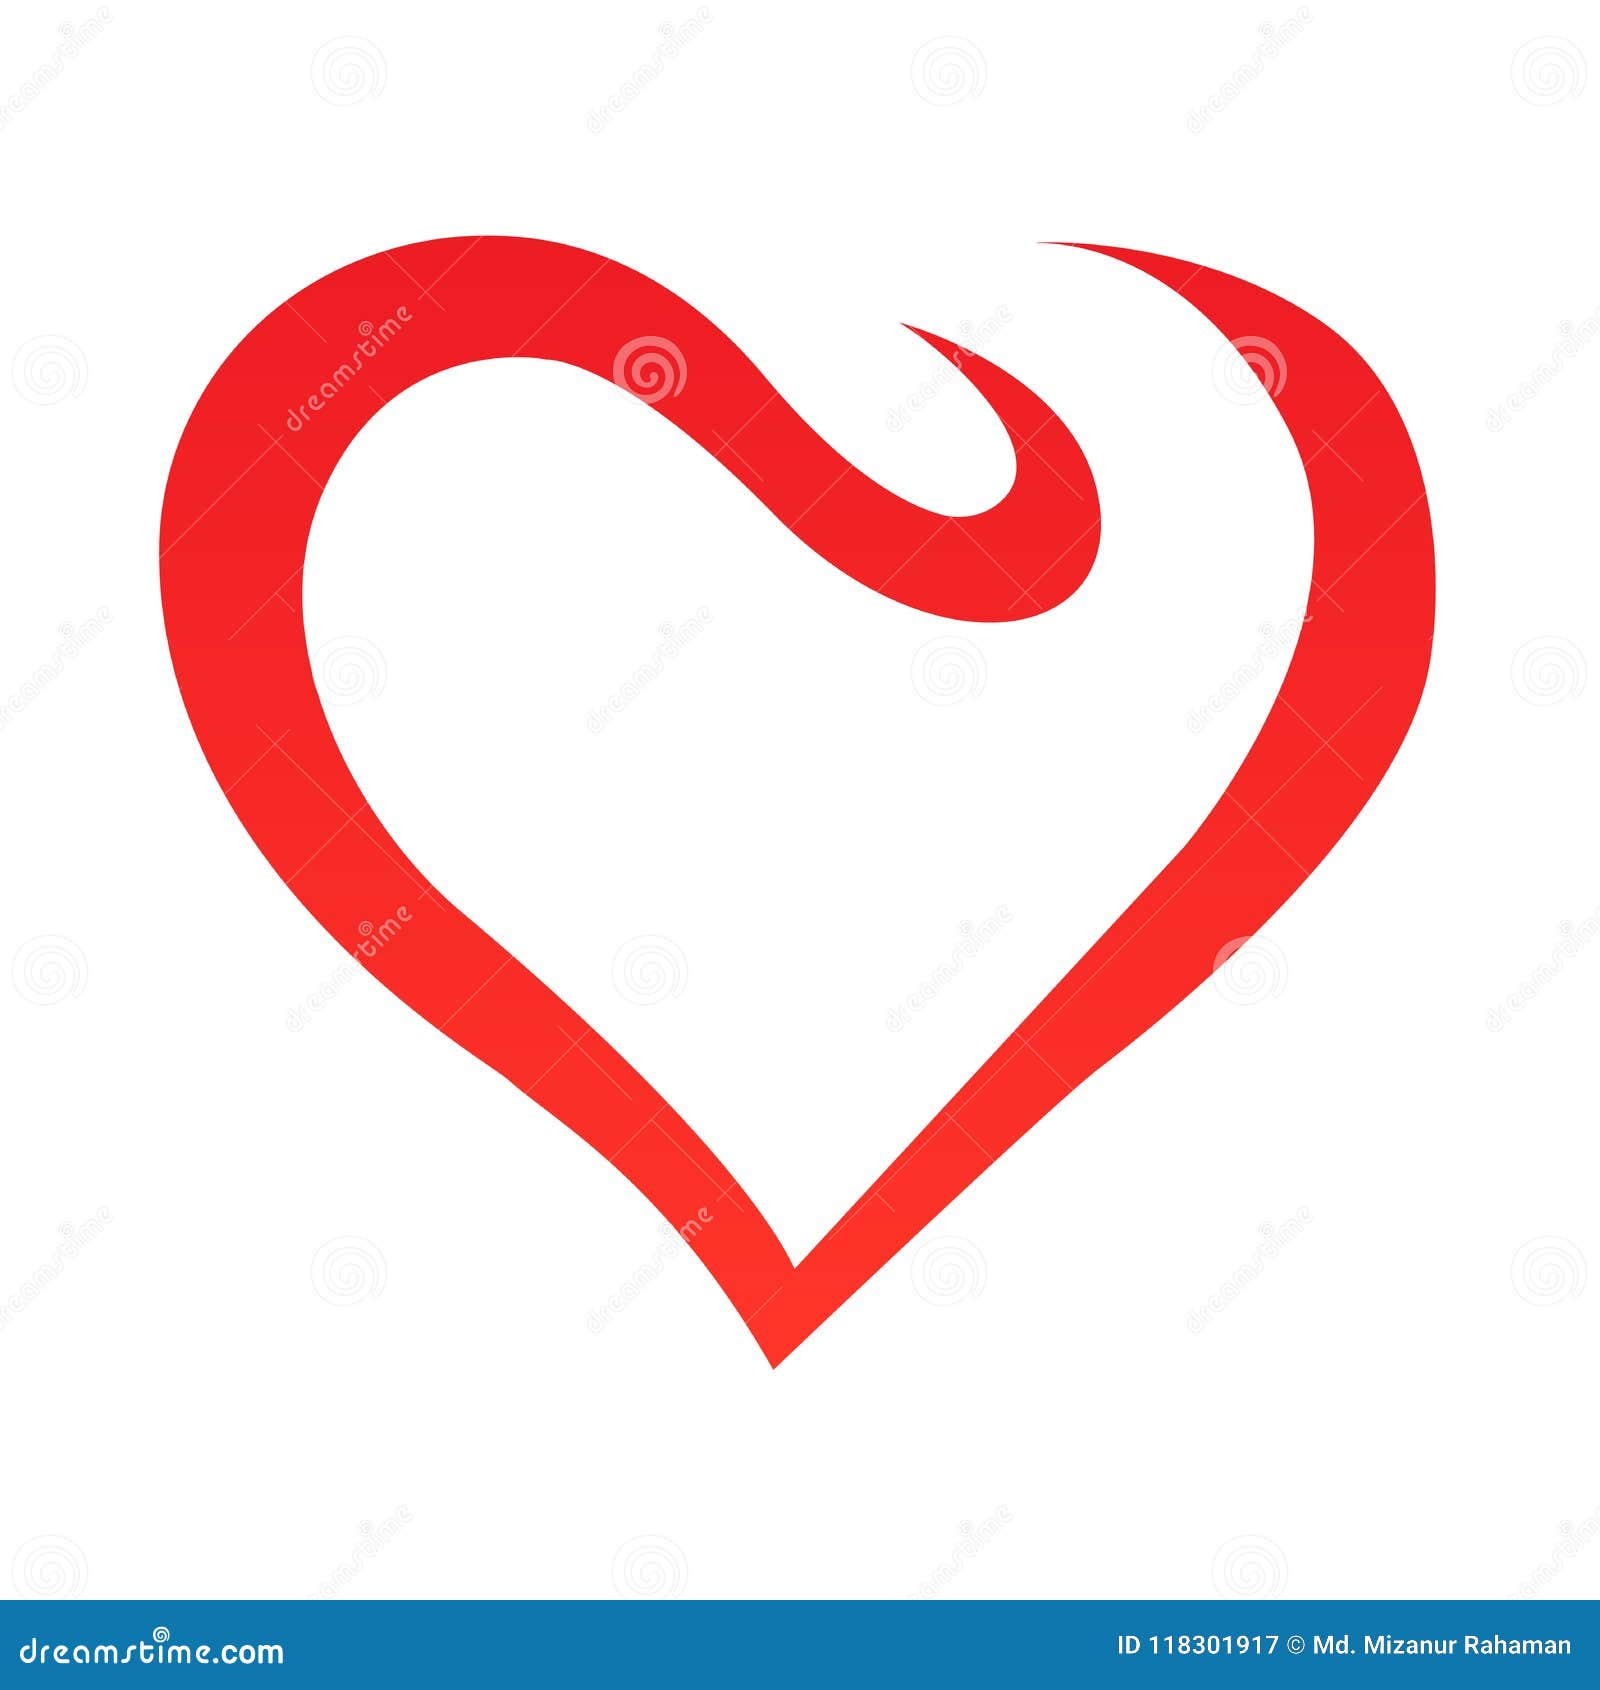 abstract heart  outline.  . red heart icon in flat style. the heart as a  of love.